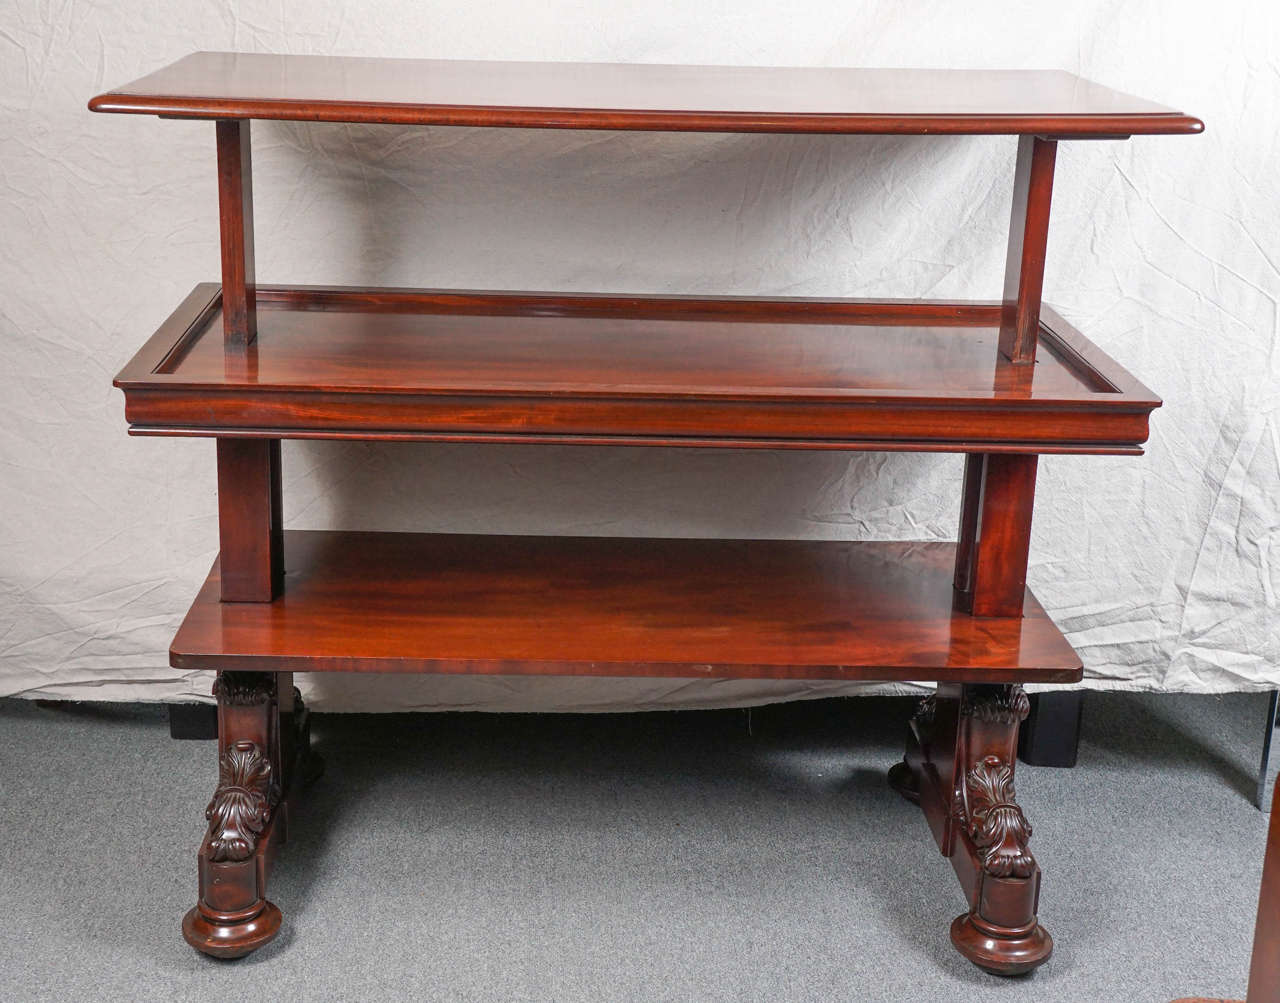 English metamorphic console table with carved mahogany base.